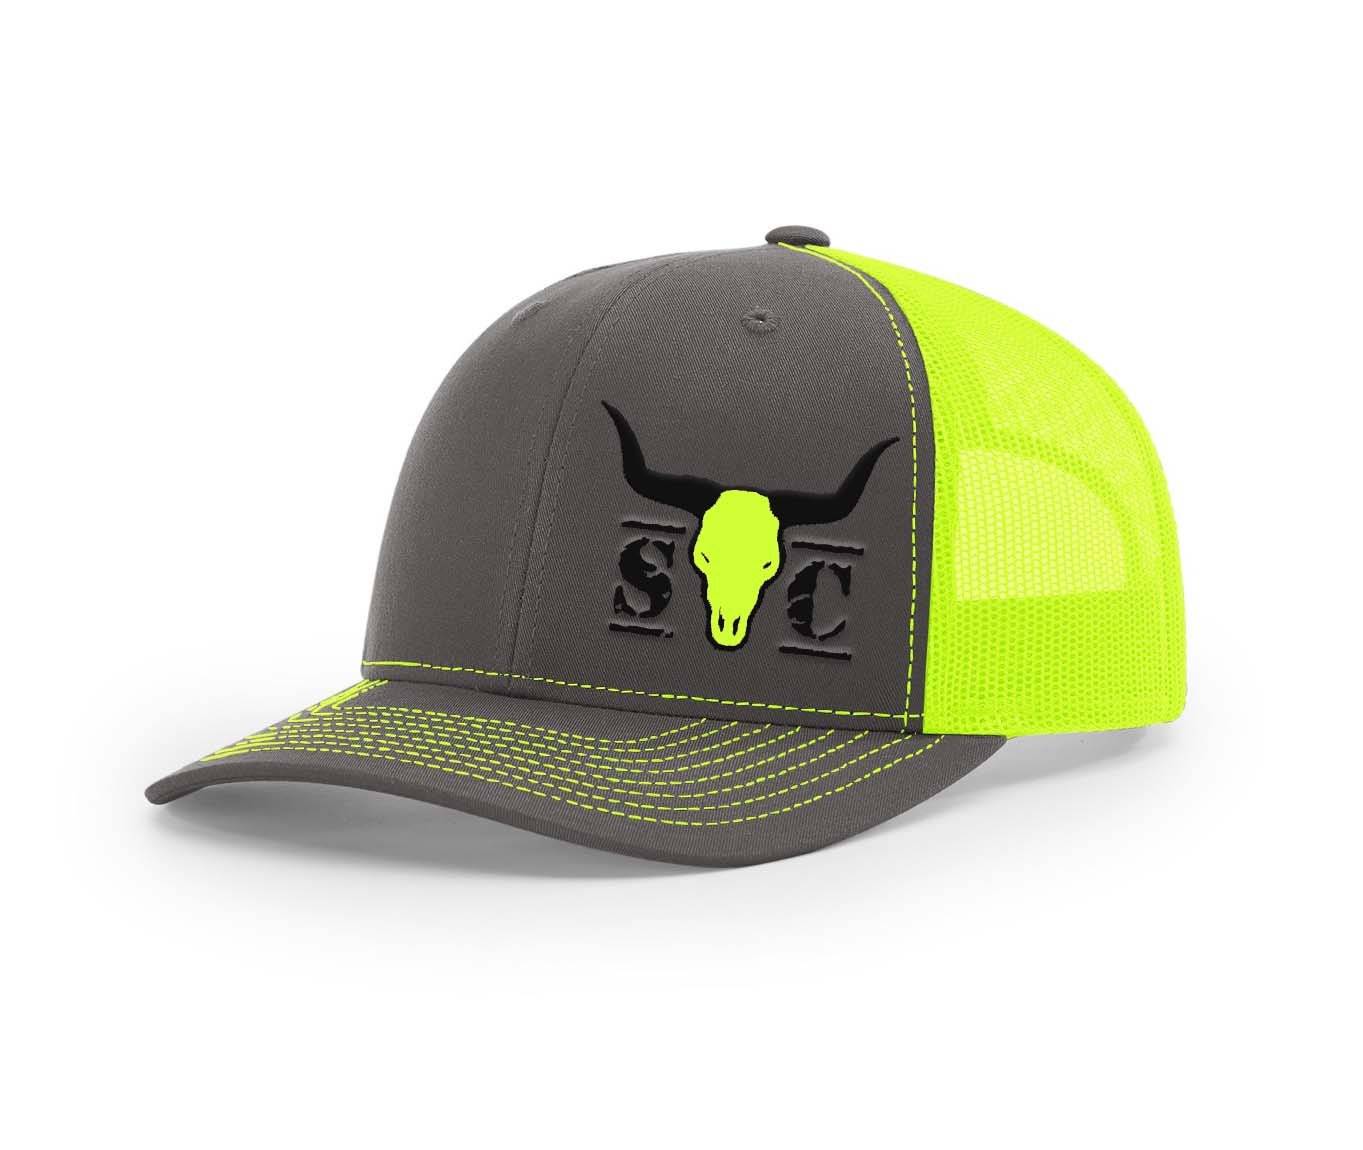 Cattle Company - Swamp Cracker Snapback Outdoorsman Hat, Charcoal/Neon Yellow